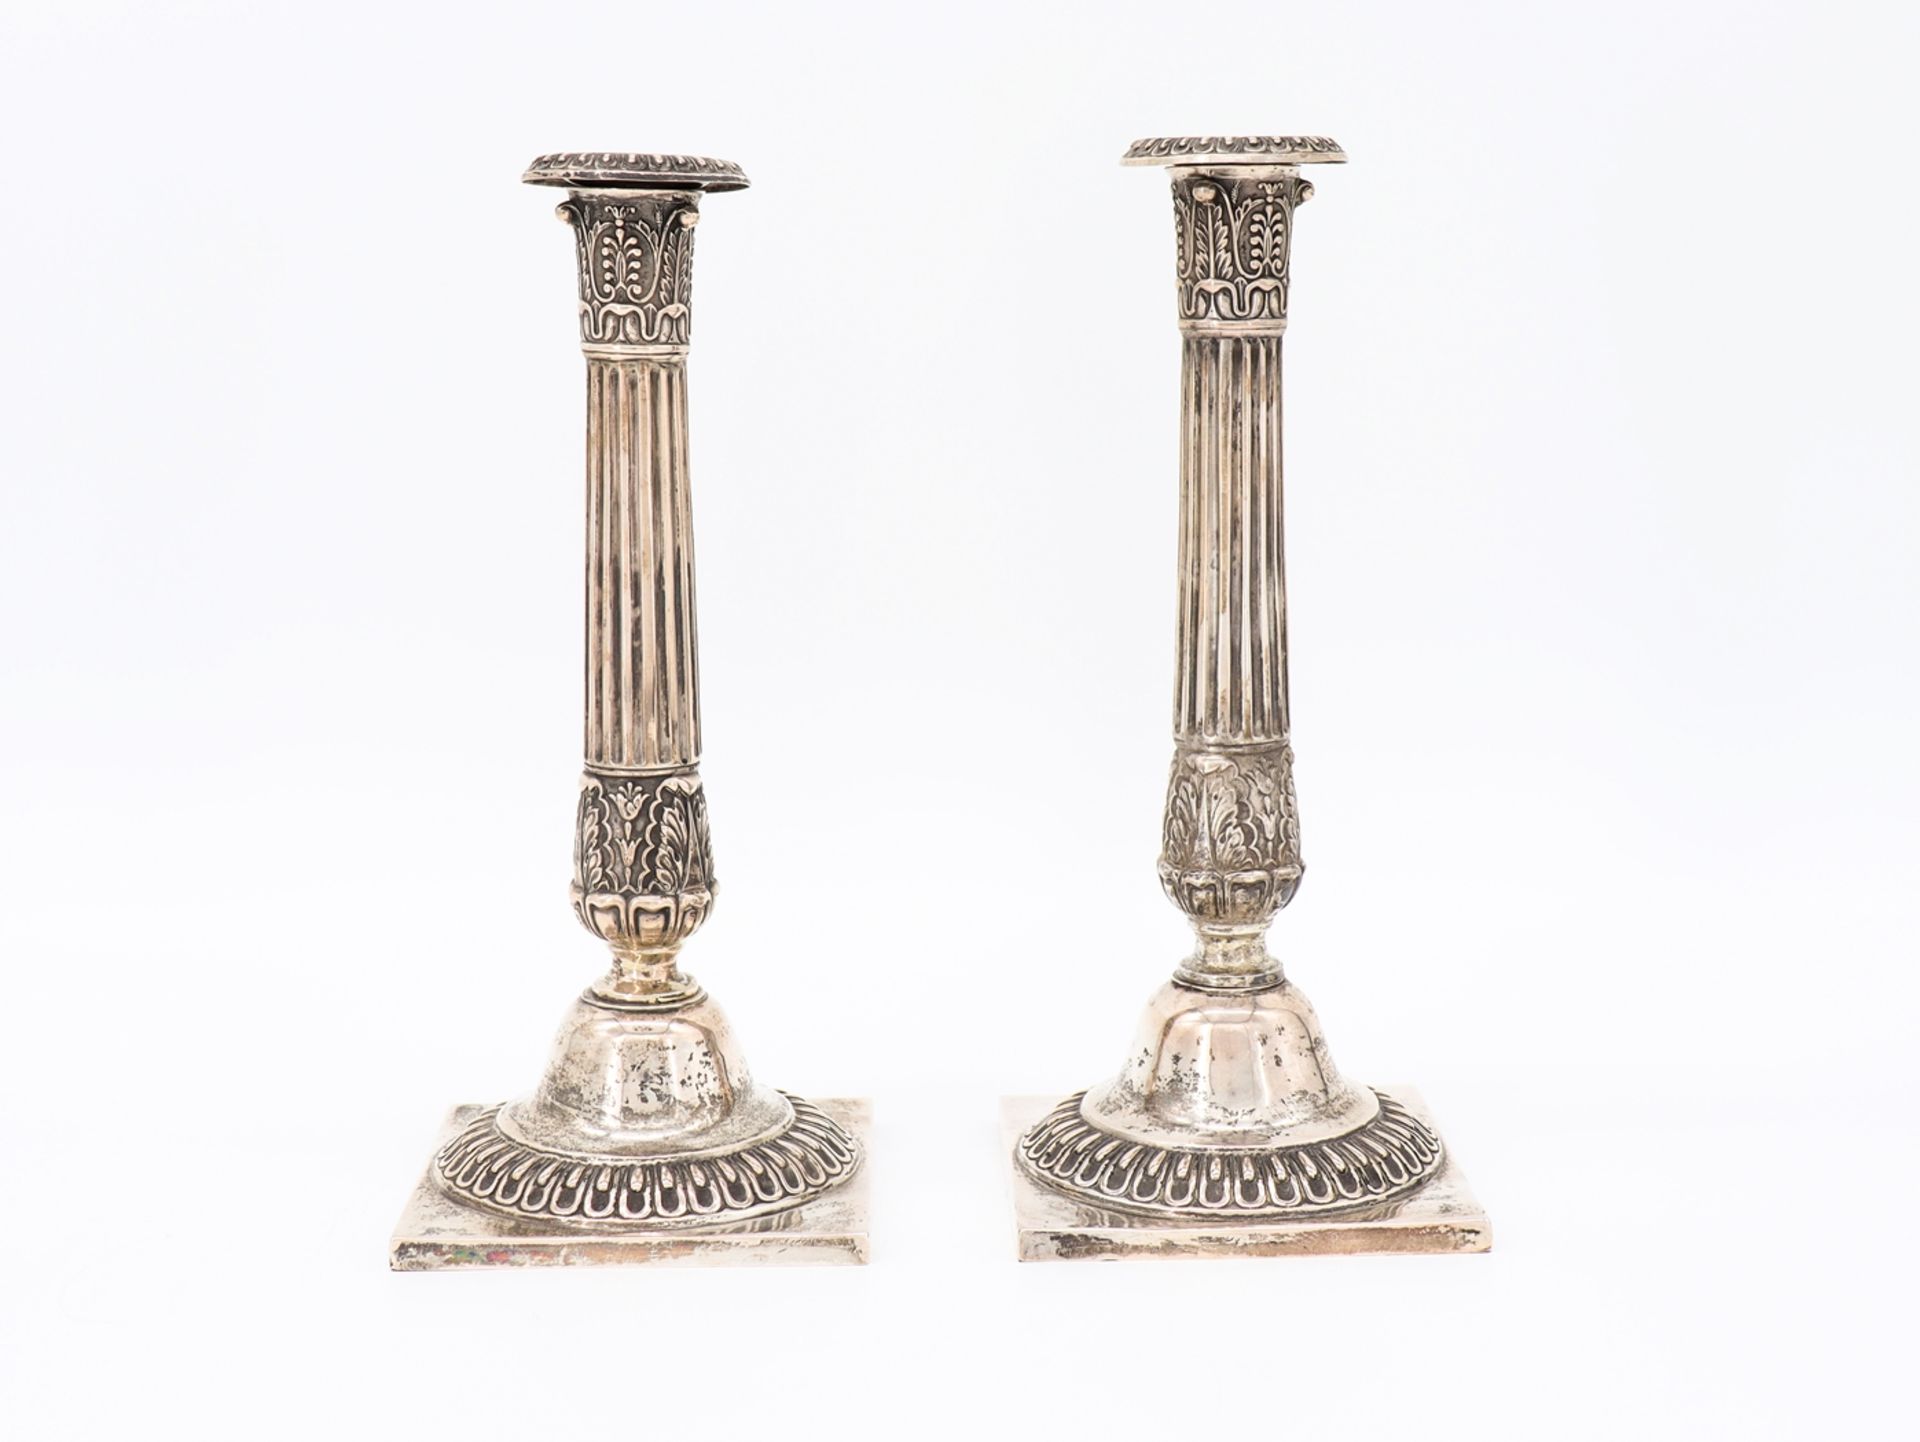 Anton Friedrich Burgmüller, Weissenfels, Pair of Empire candlesticks, early 19th century. - Image 3 of 7